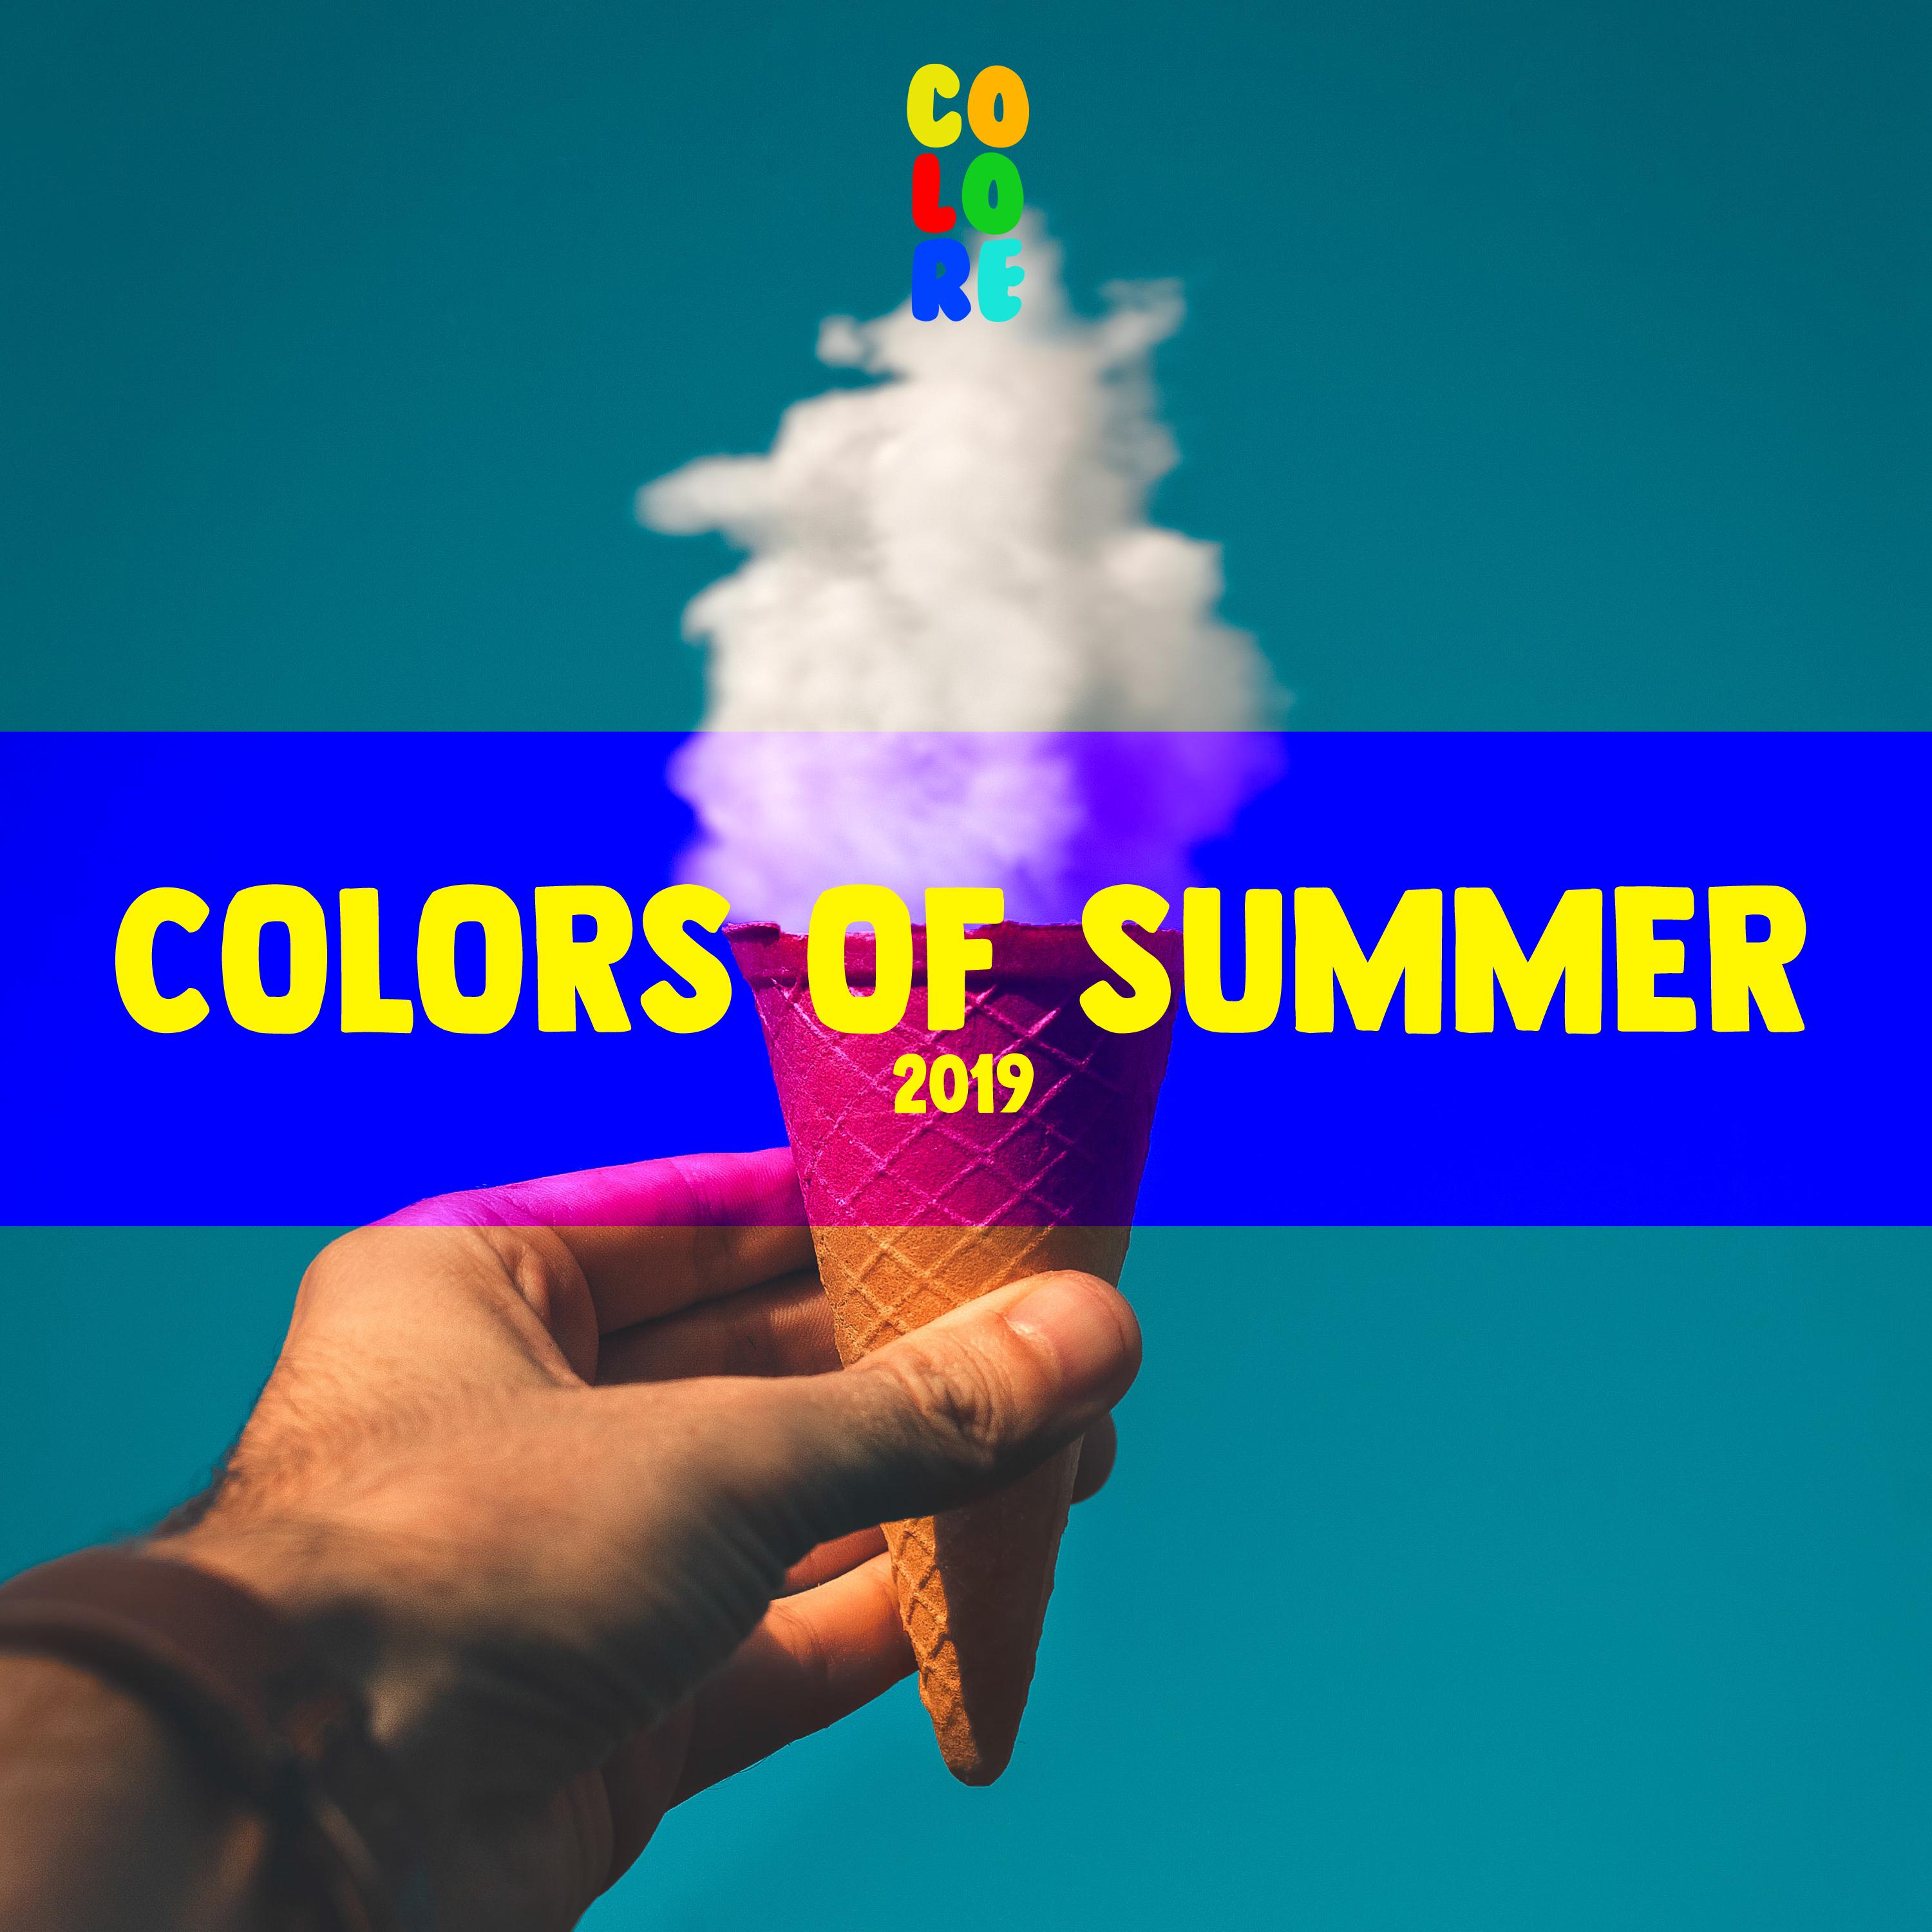 Colors of Summer 2019